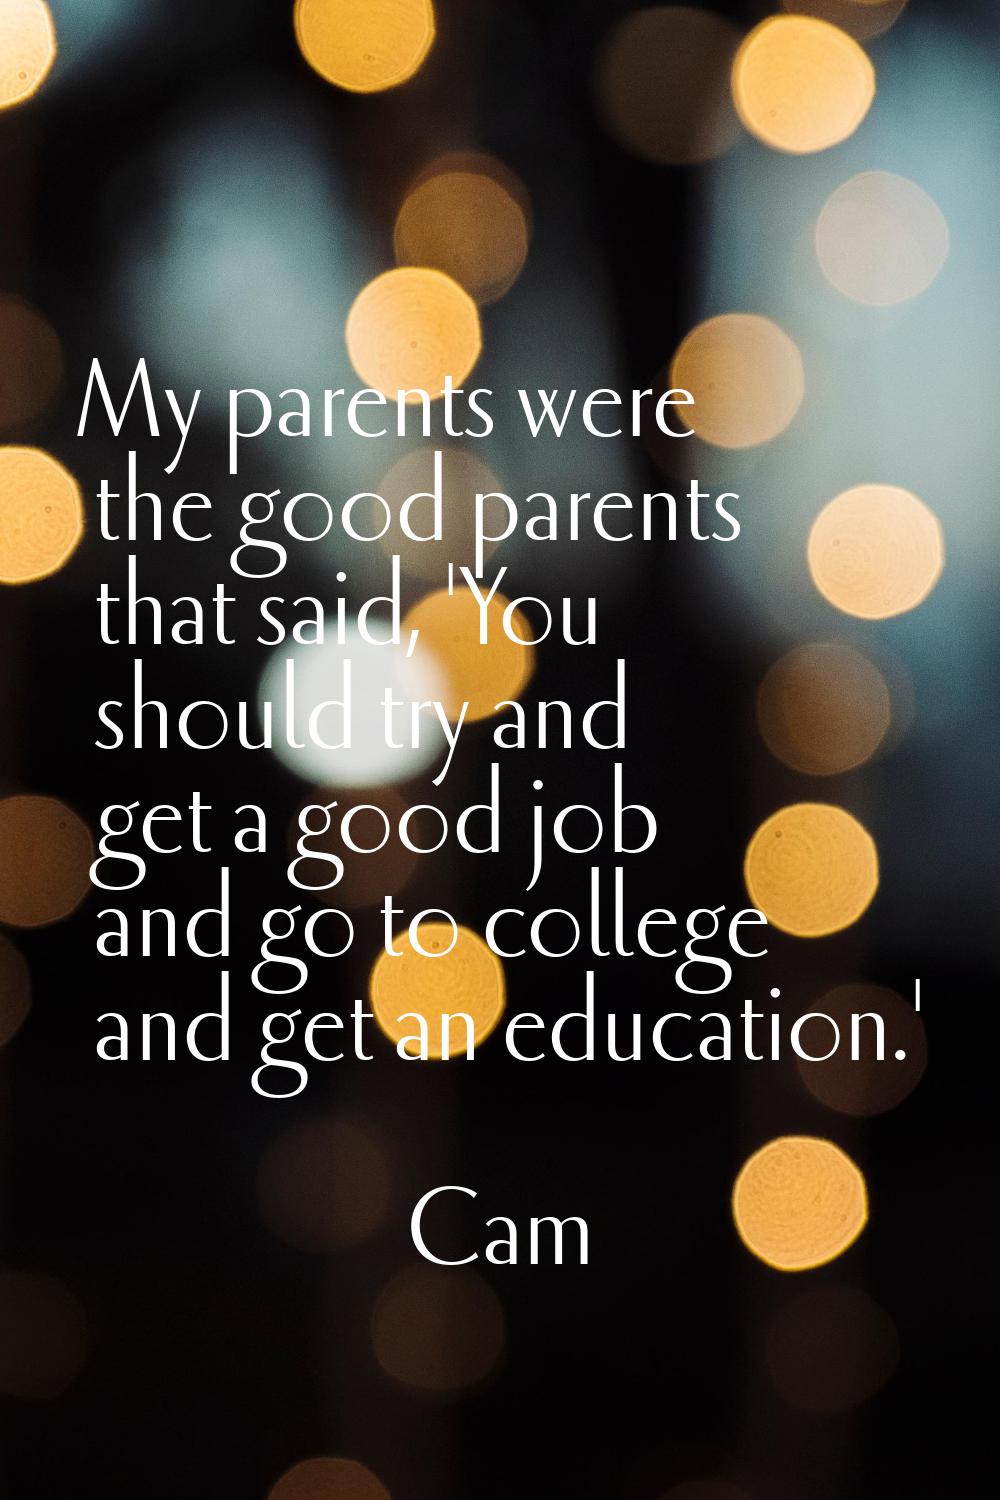 My parents were the good parents that said, 'You should try and get a good job and go to college an